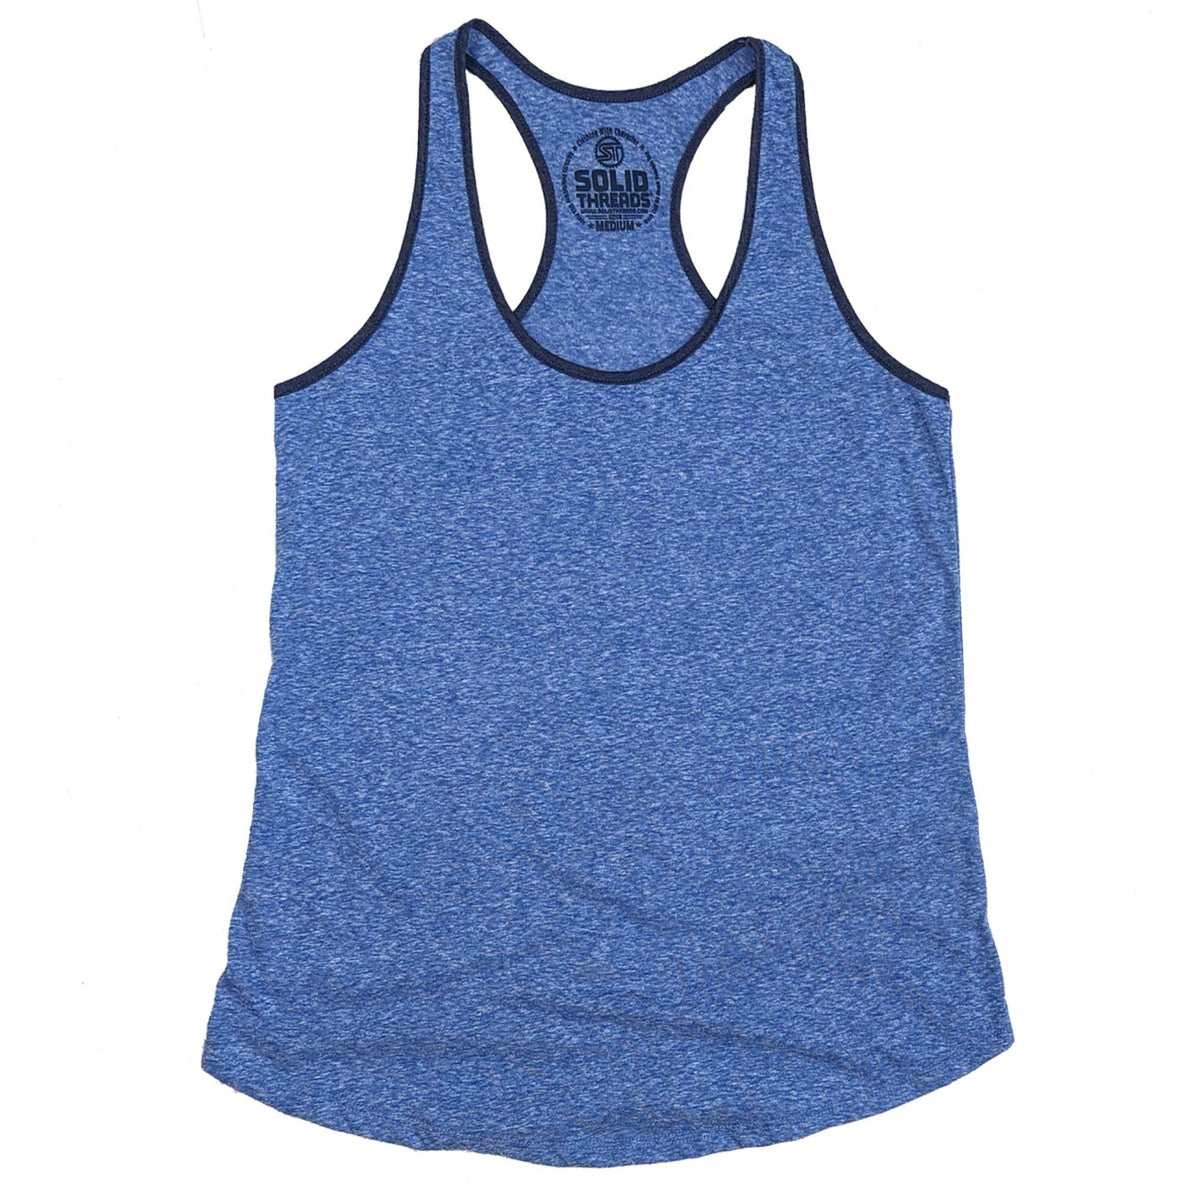 Women&#39;s Solid Threads Retro Ringer Triblend Royal/Navy Tank Top | Vintage Inspired USA Made Tee